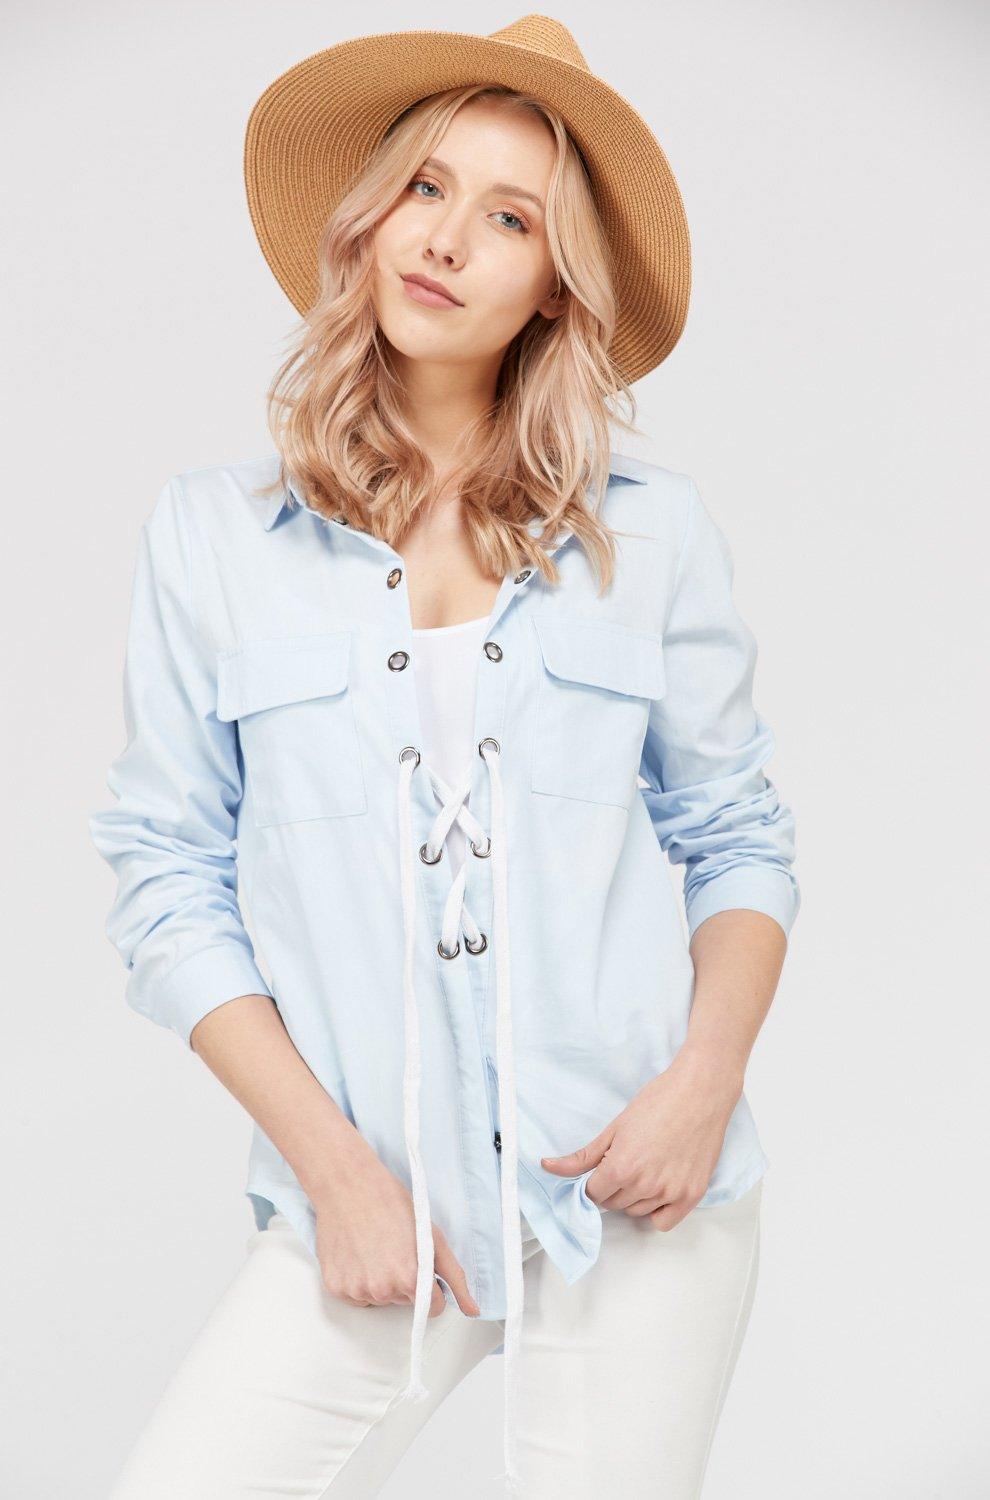 Women's Lace Up Blouse Top - Brand My Case